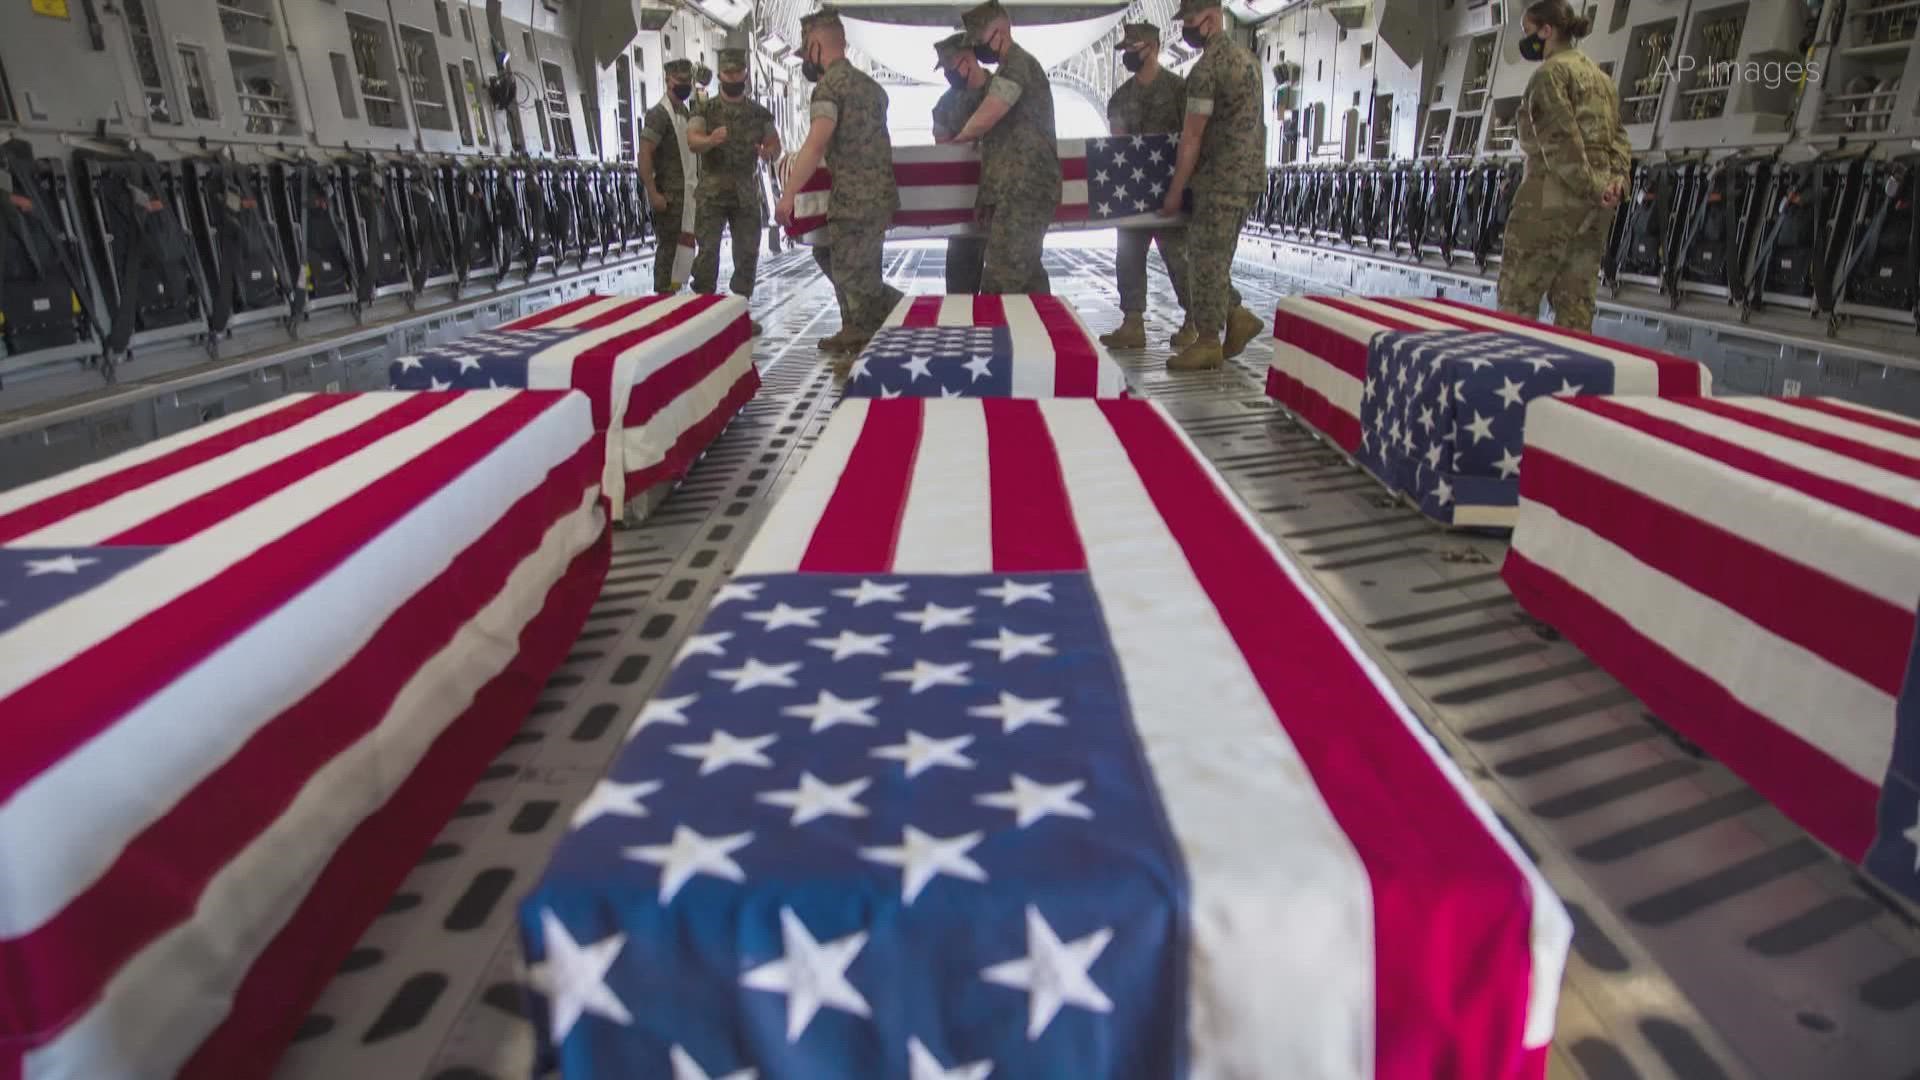 More than 2,500 American soldiers have died in Afghanistan alone.